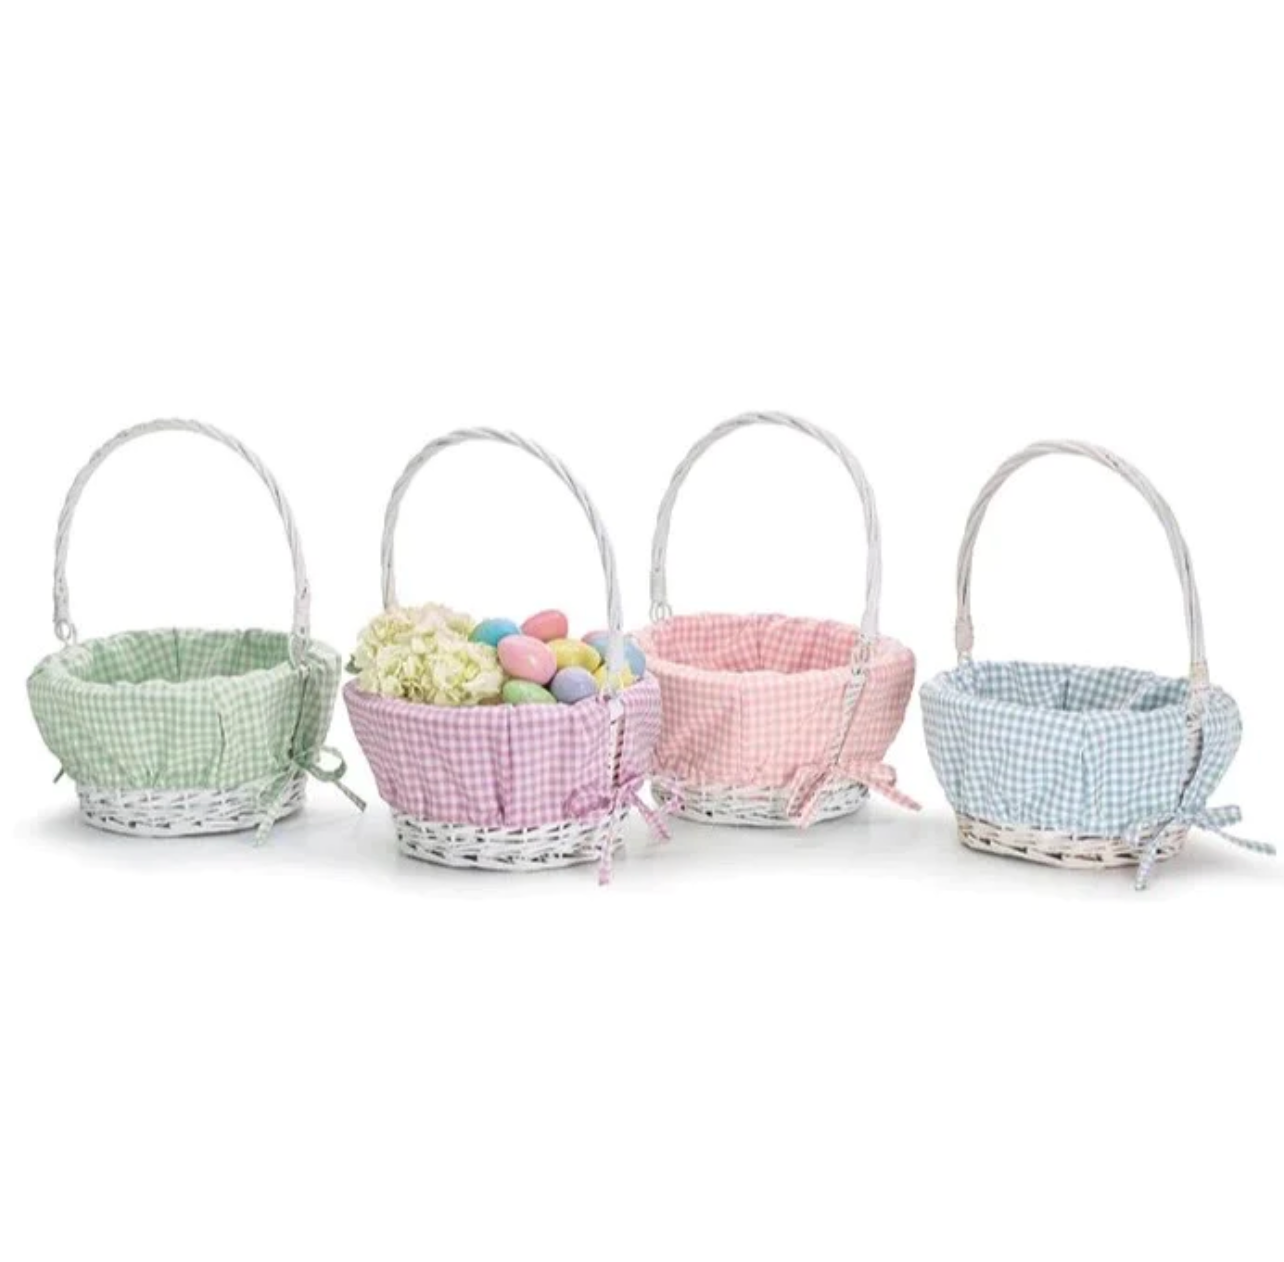 Gingham Collapsible Handle Easter Basket | Personalization Included - Magpies Paducah